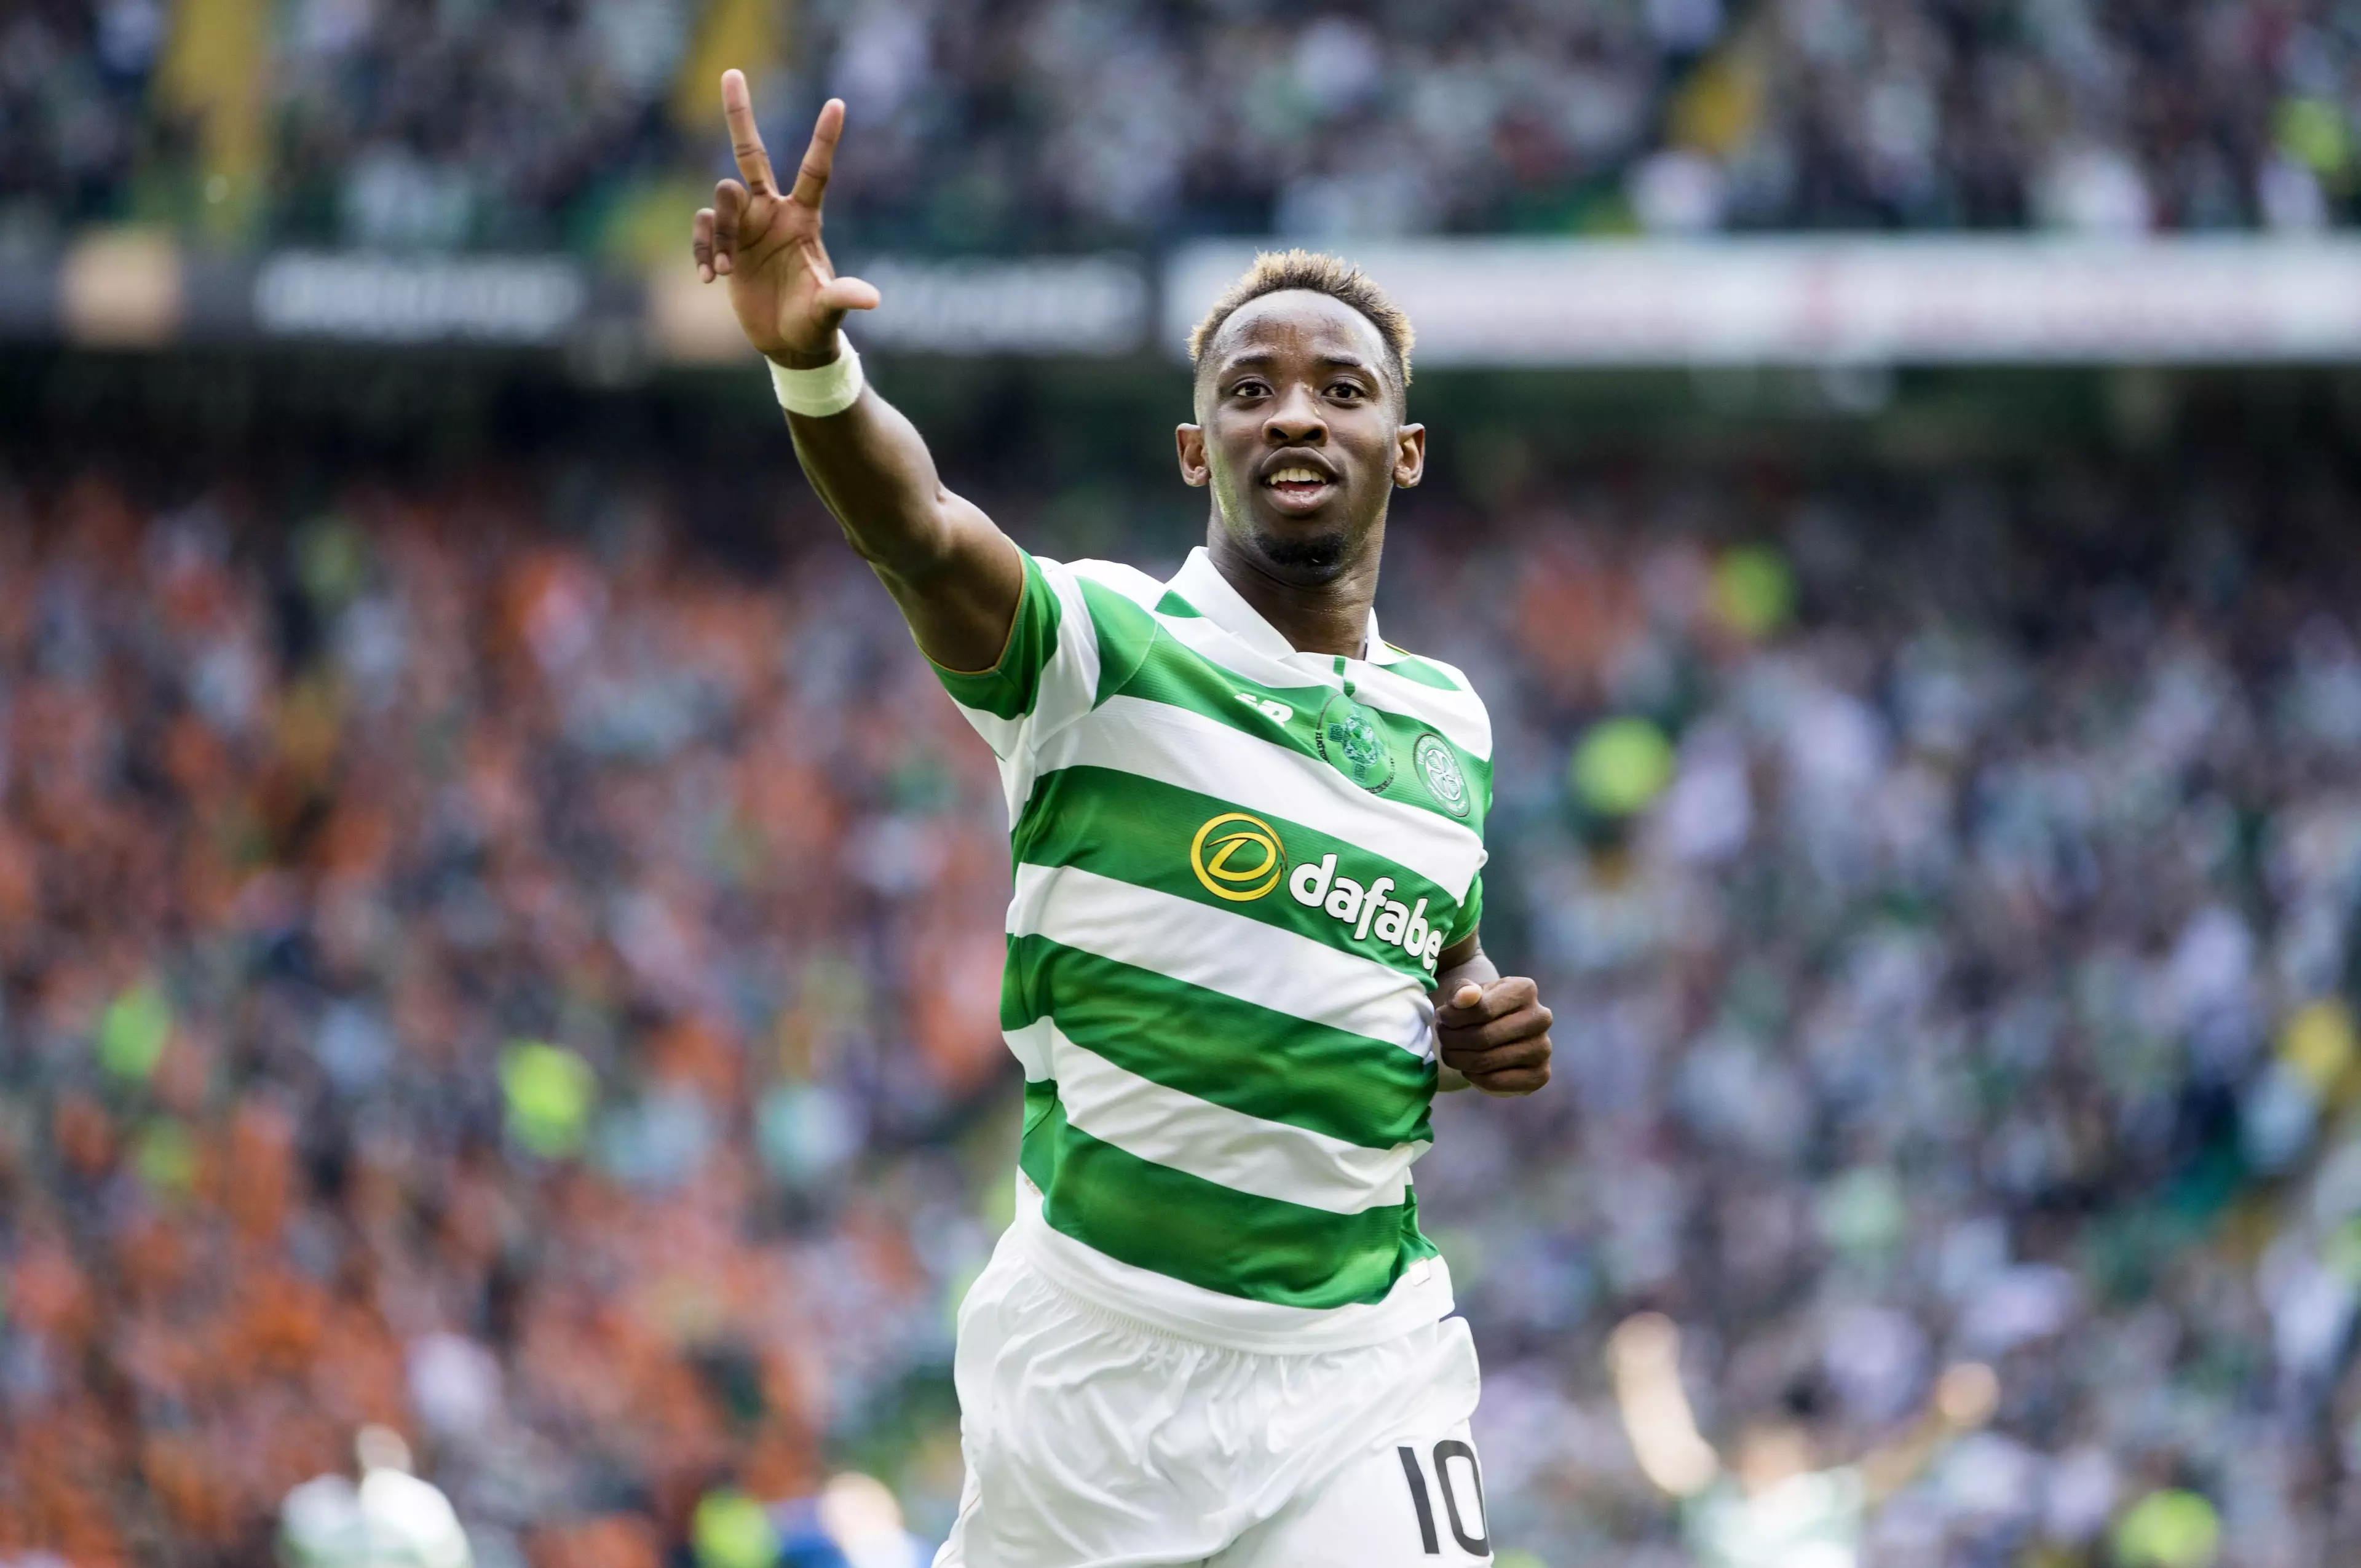 Moussa Dembele Donates 25 Celtic Jerseys to Team in Disadvantaged African City